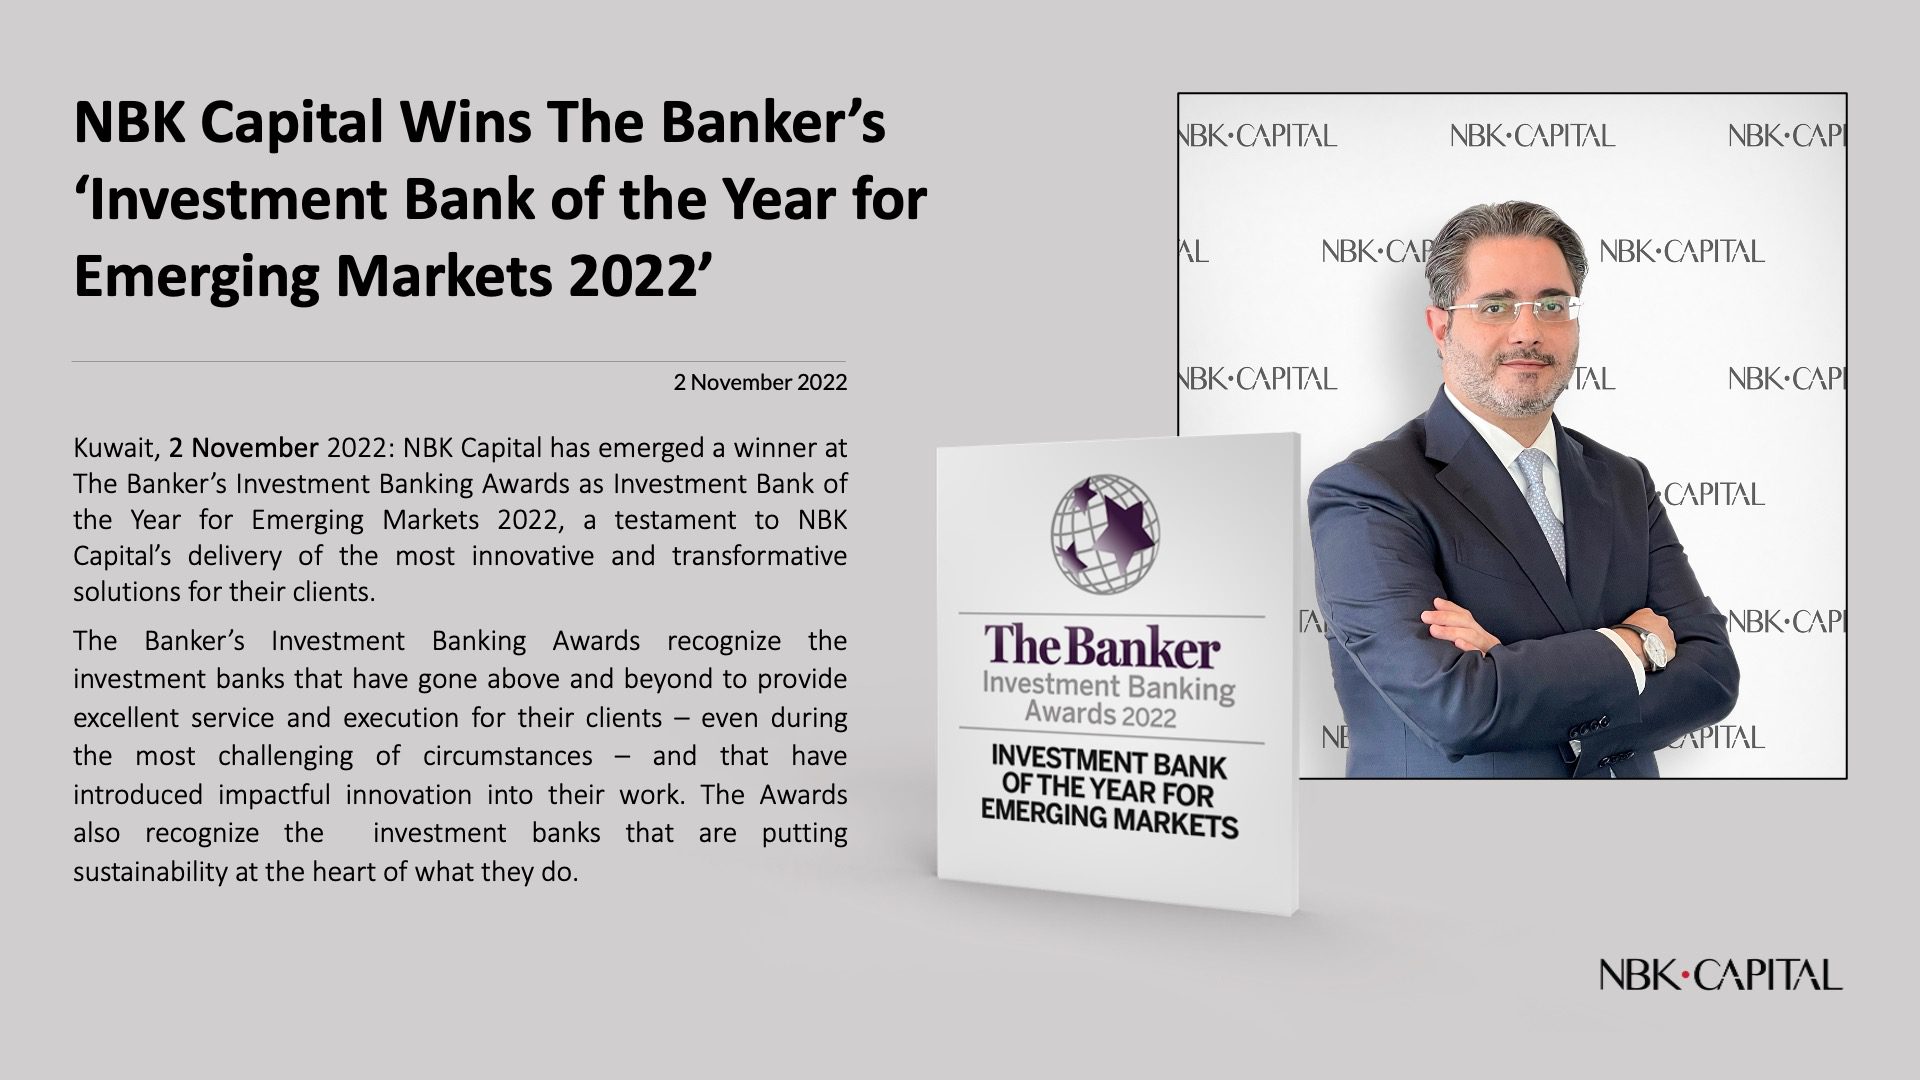 NBK Capital Wins The Banker’s ‘Investment Bank of the Year for Emerging Markets 2022’